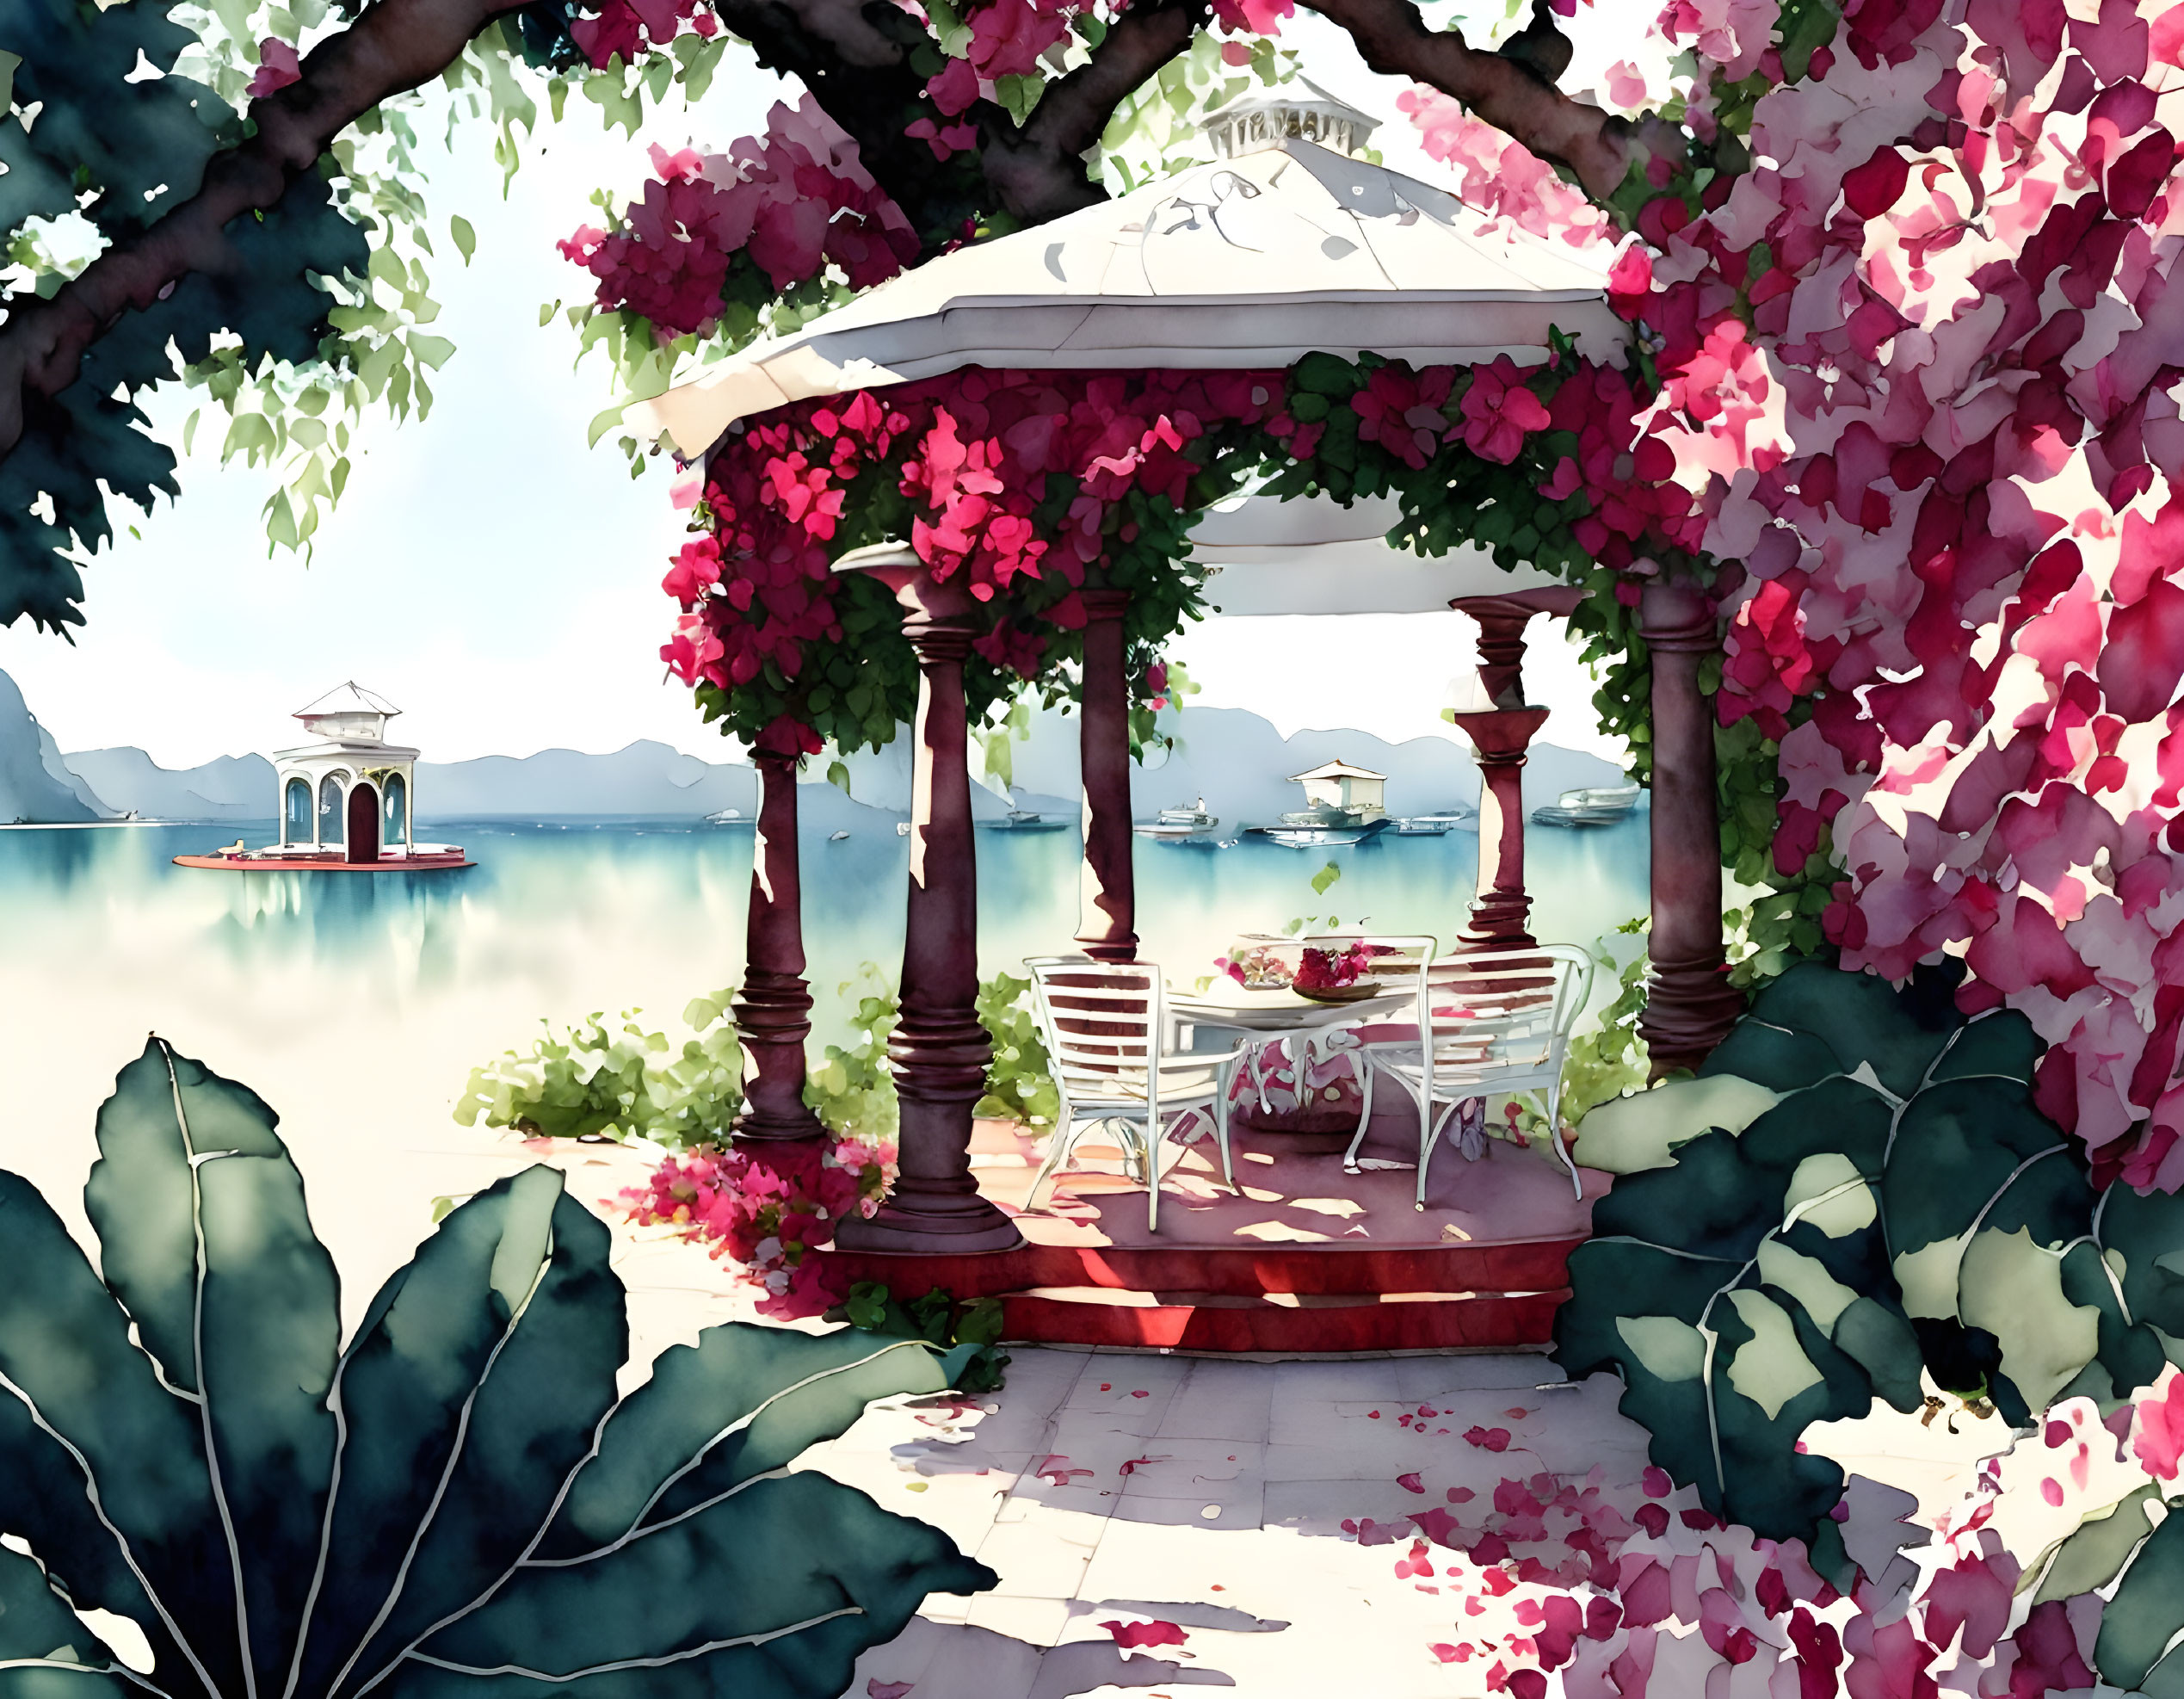 Tranquil lakeside gazebo with floral decor and lush surroundings